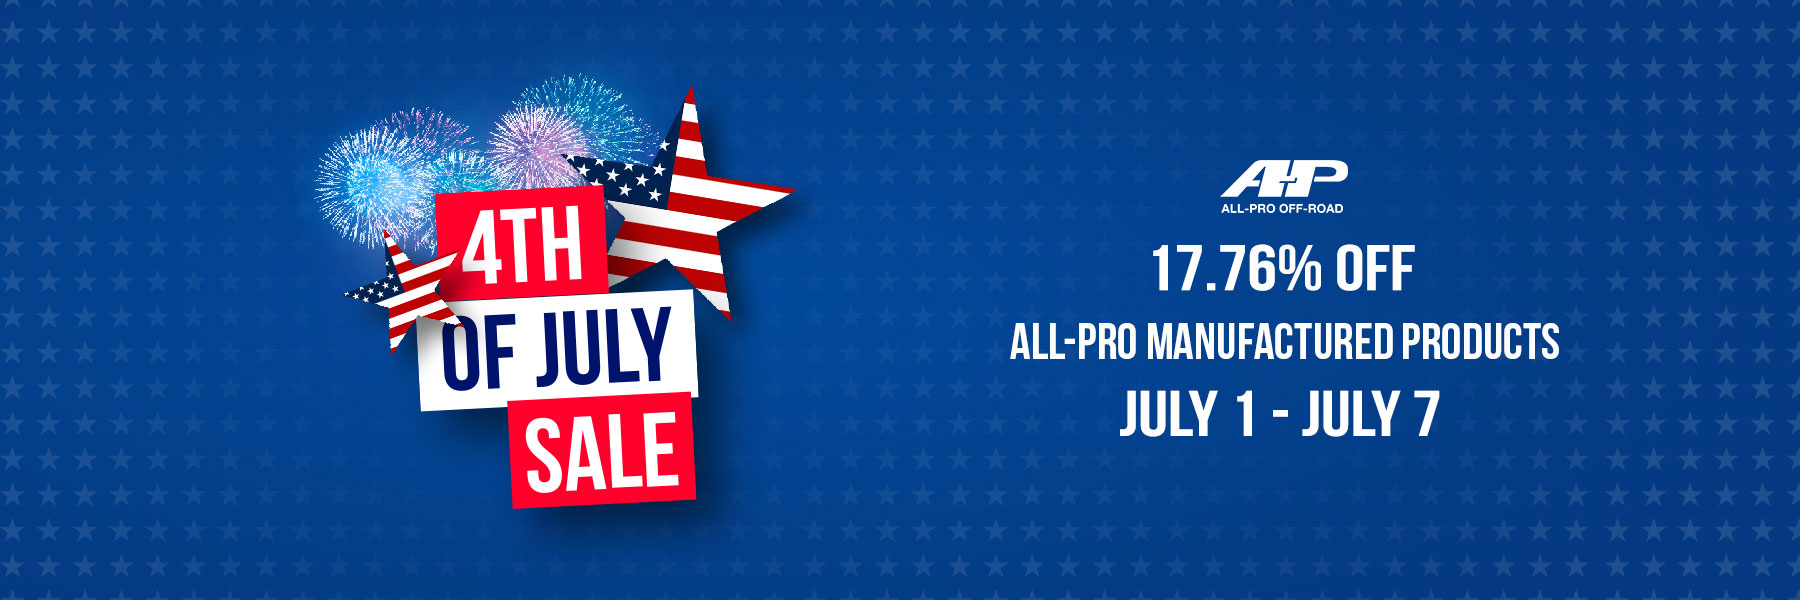 All-Pro Off-Road 2020 4th of July Sale - 17.76% Off!